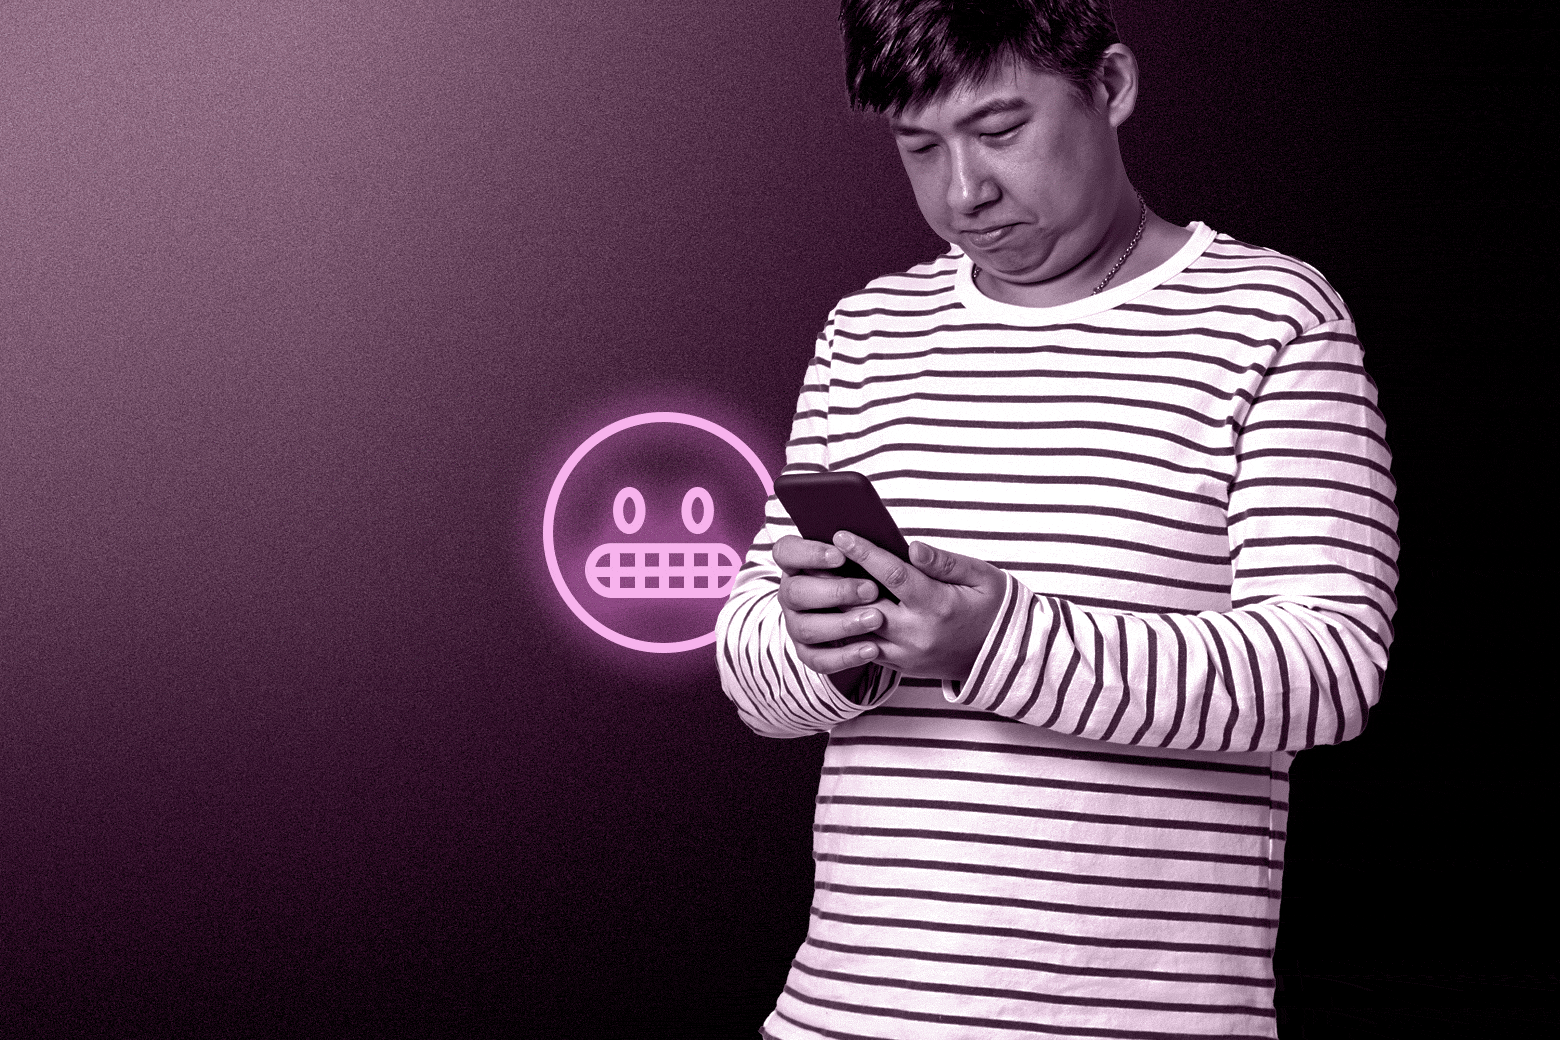 An Asian man in a black and white striped shirt looks down and texts on his phone with an awkward neon pink emoji next to him.